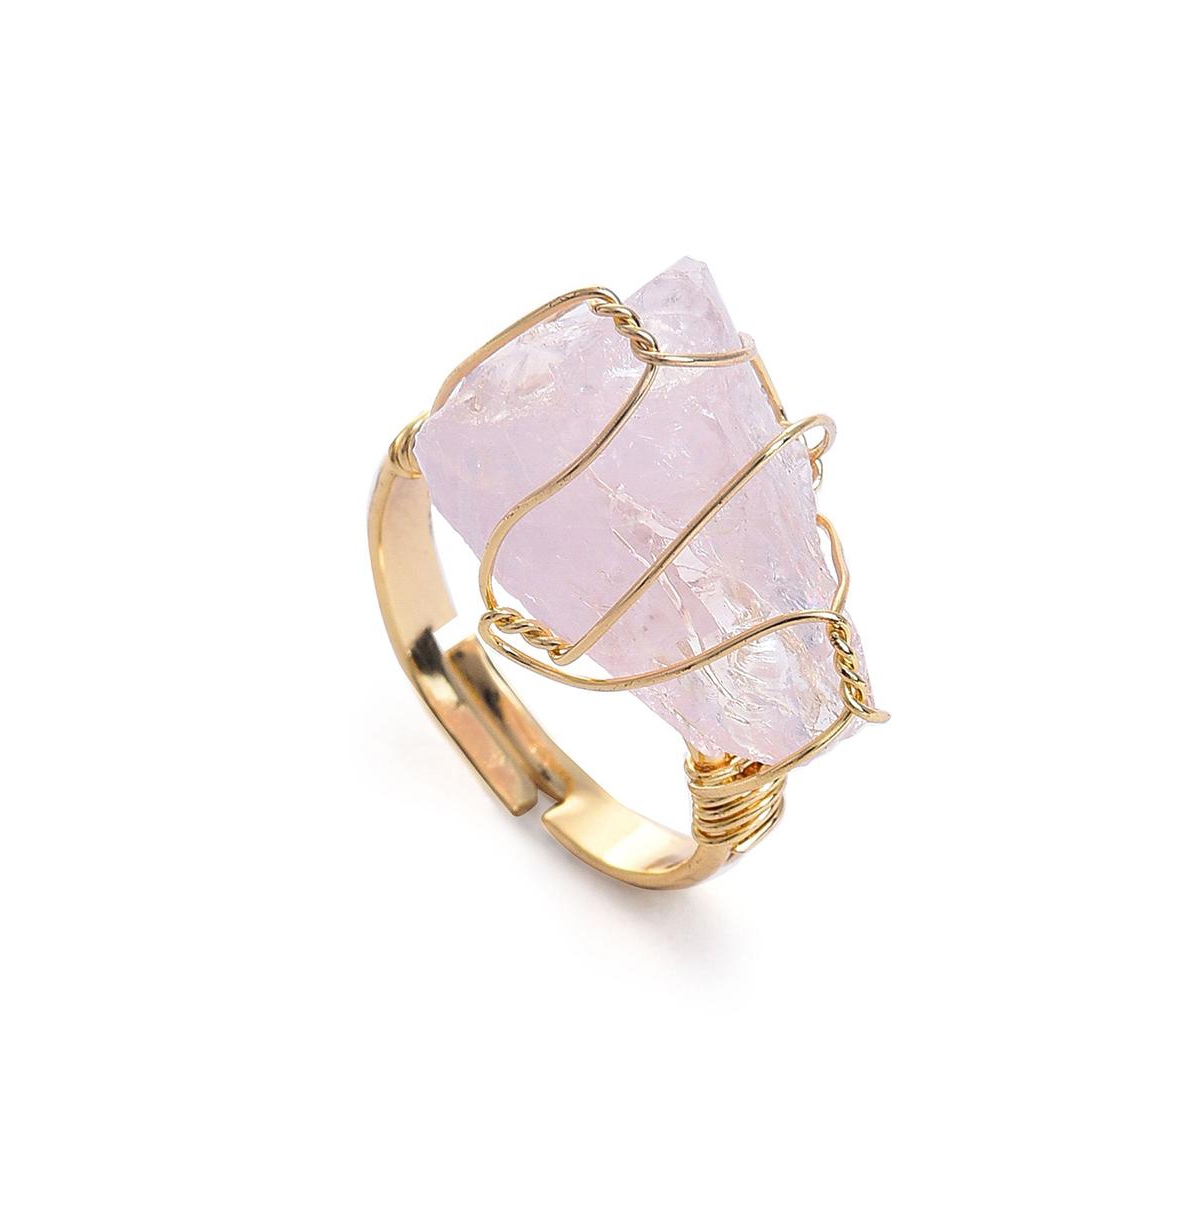 Sohi Women's White Abstract Stone Cocktail Ring